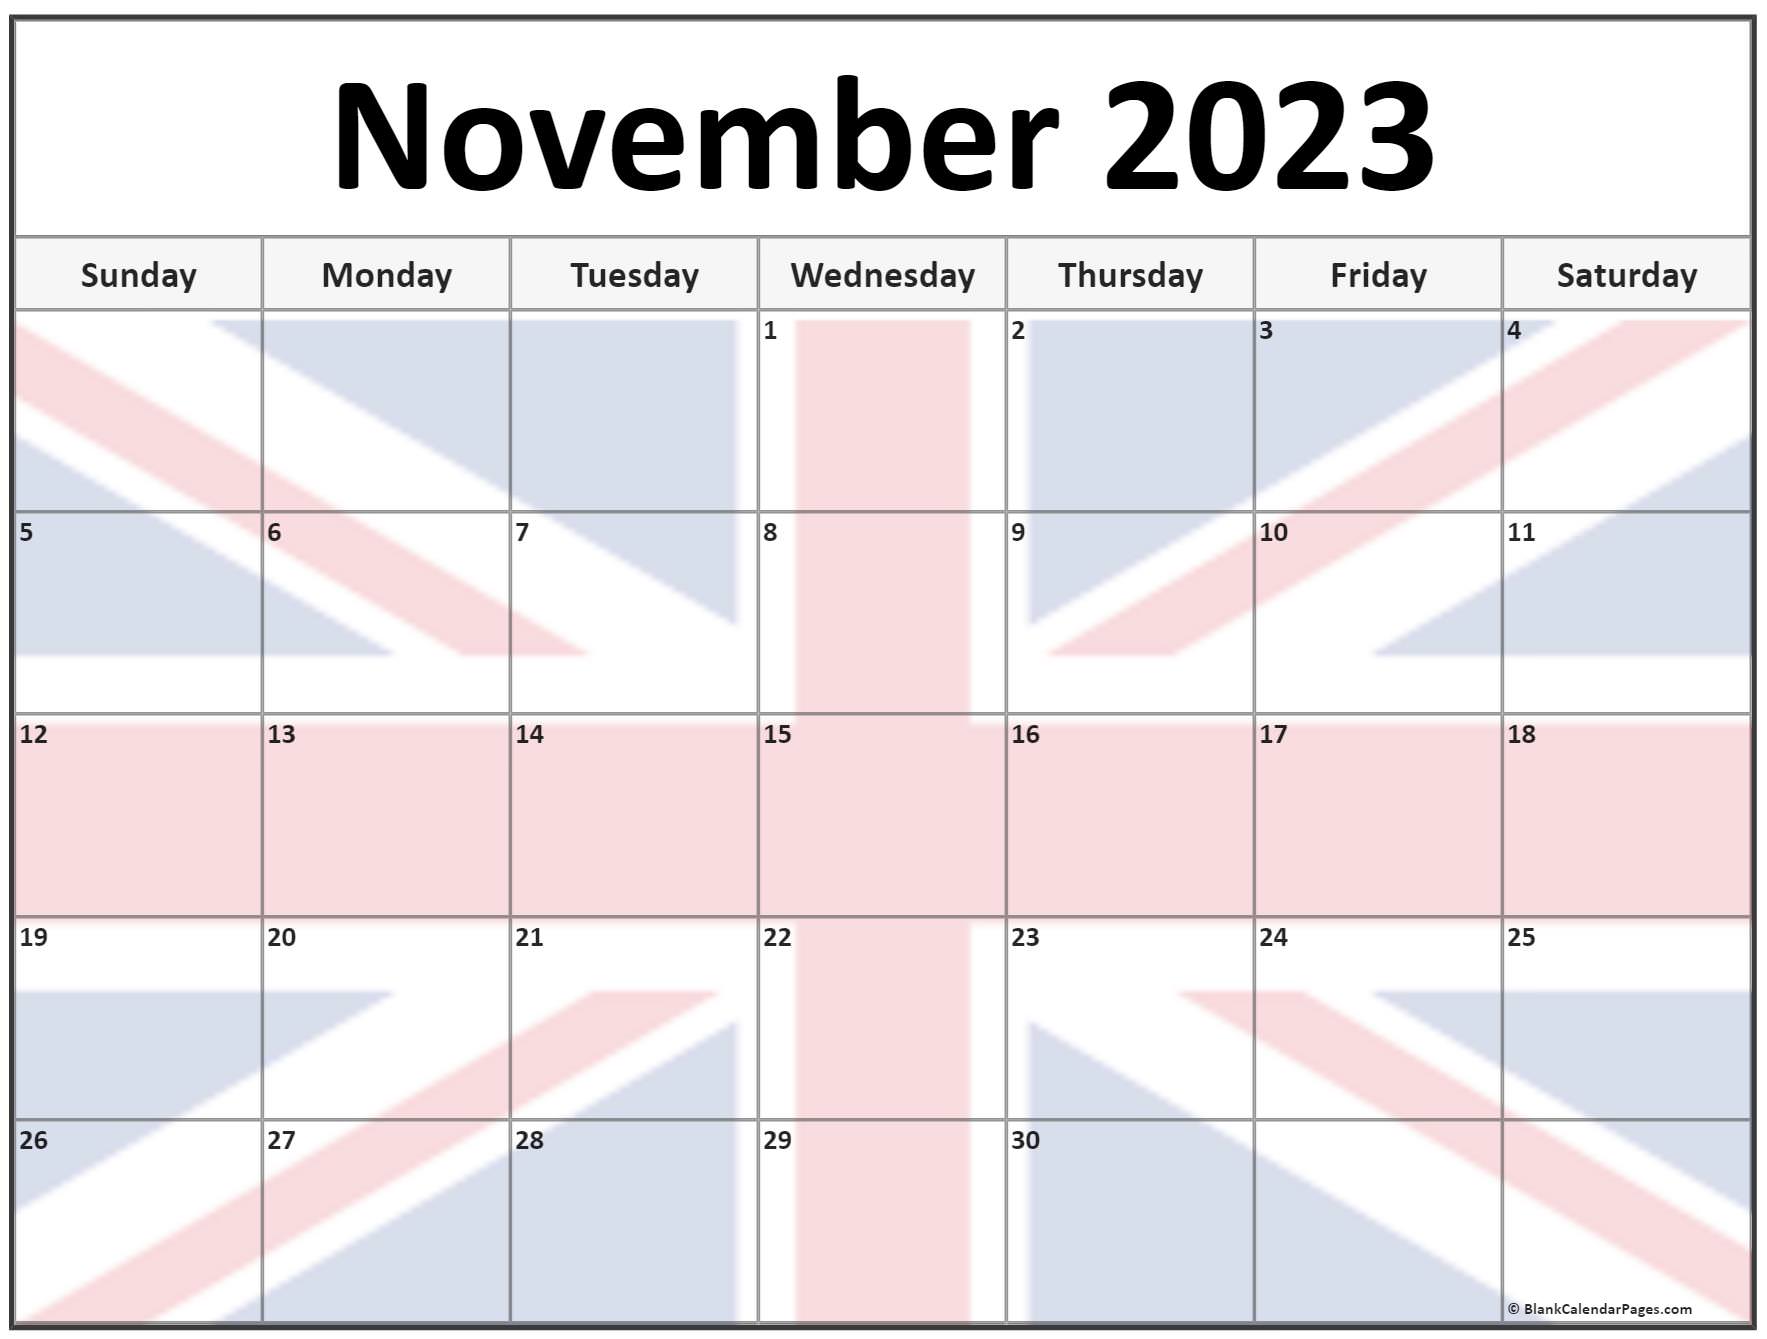 Collection of November 2023 photo calendars with image filters.